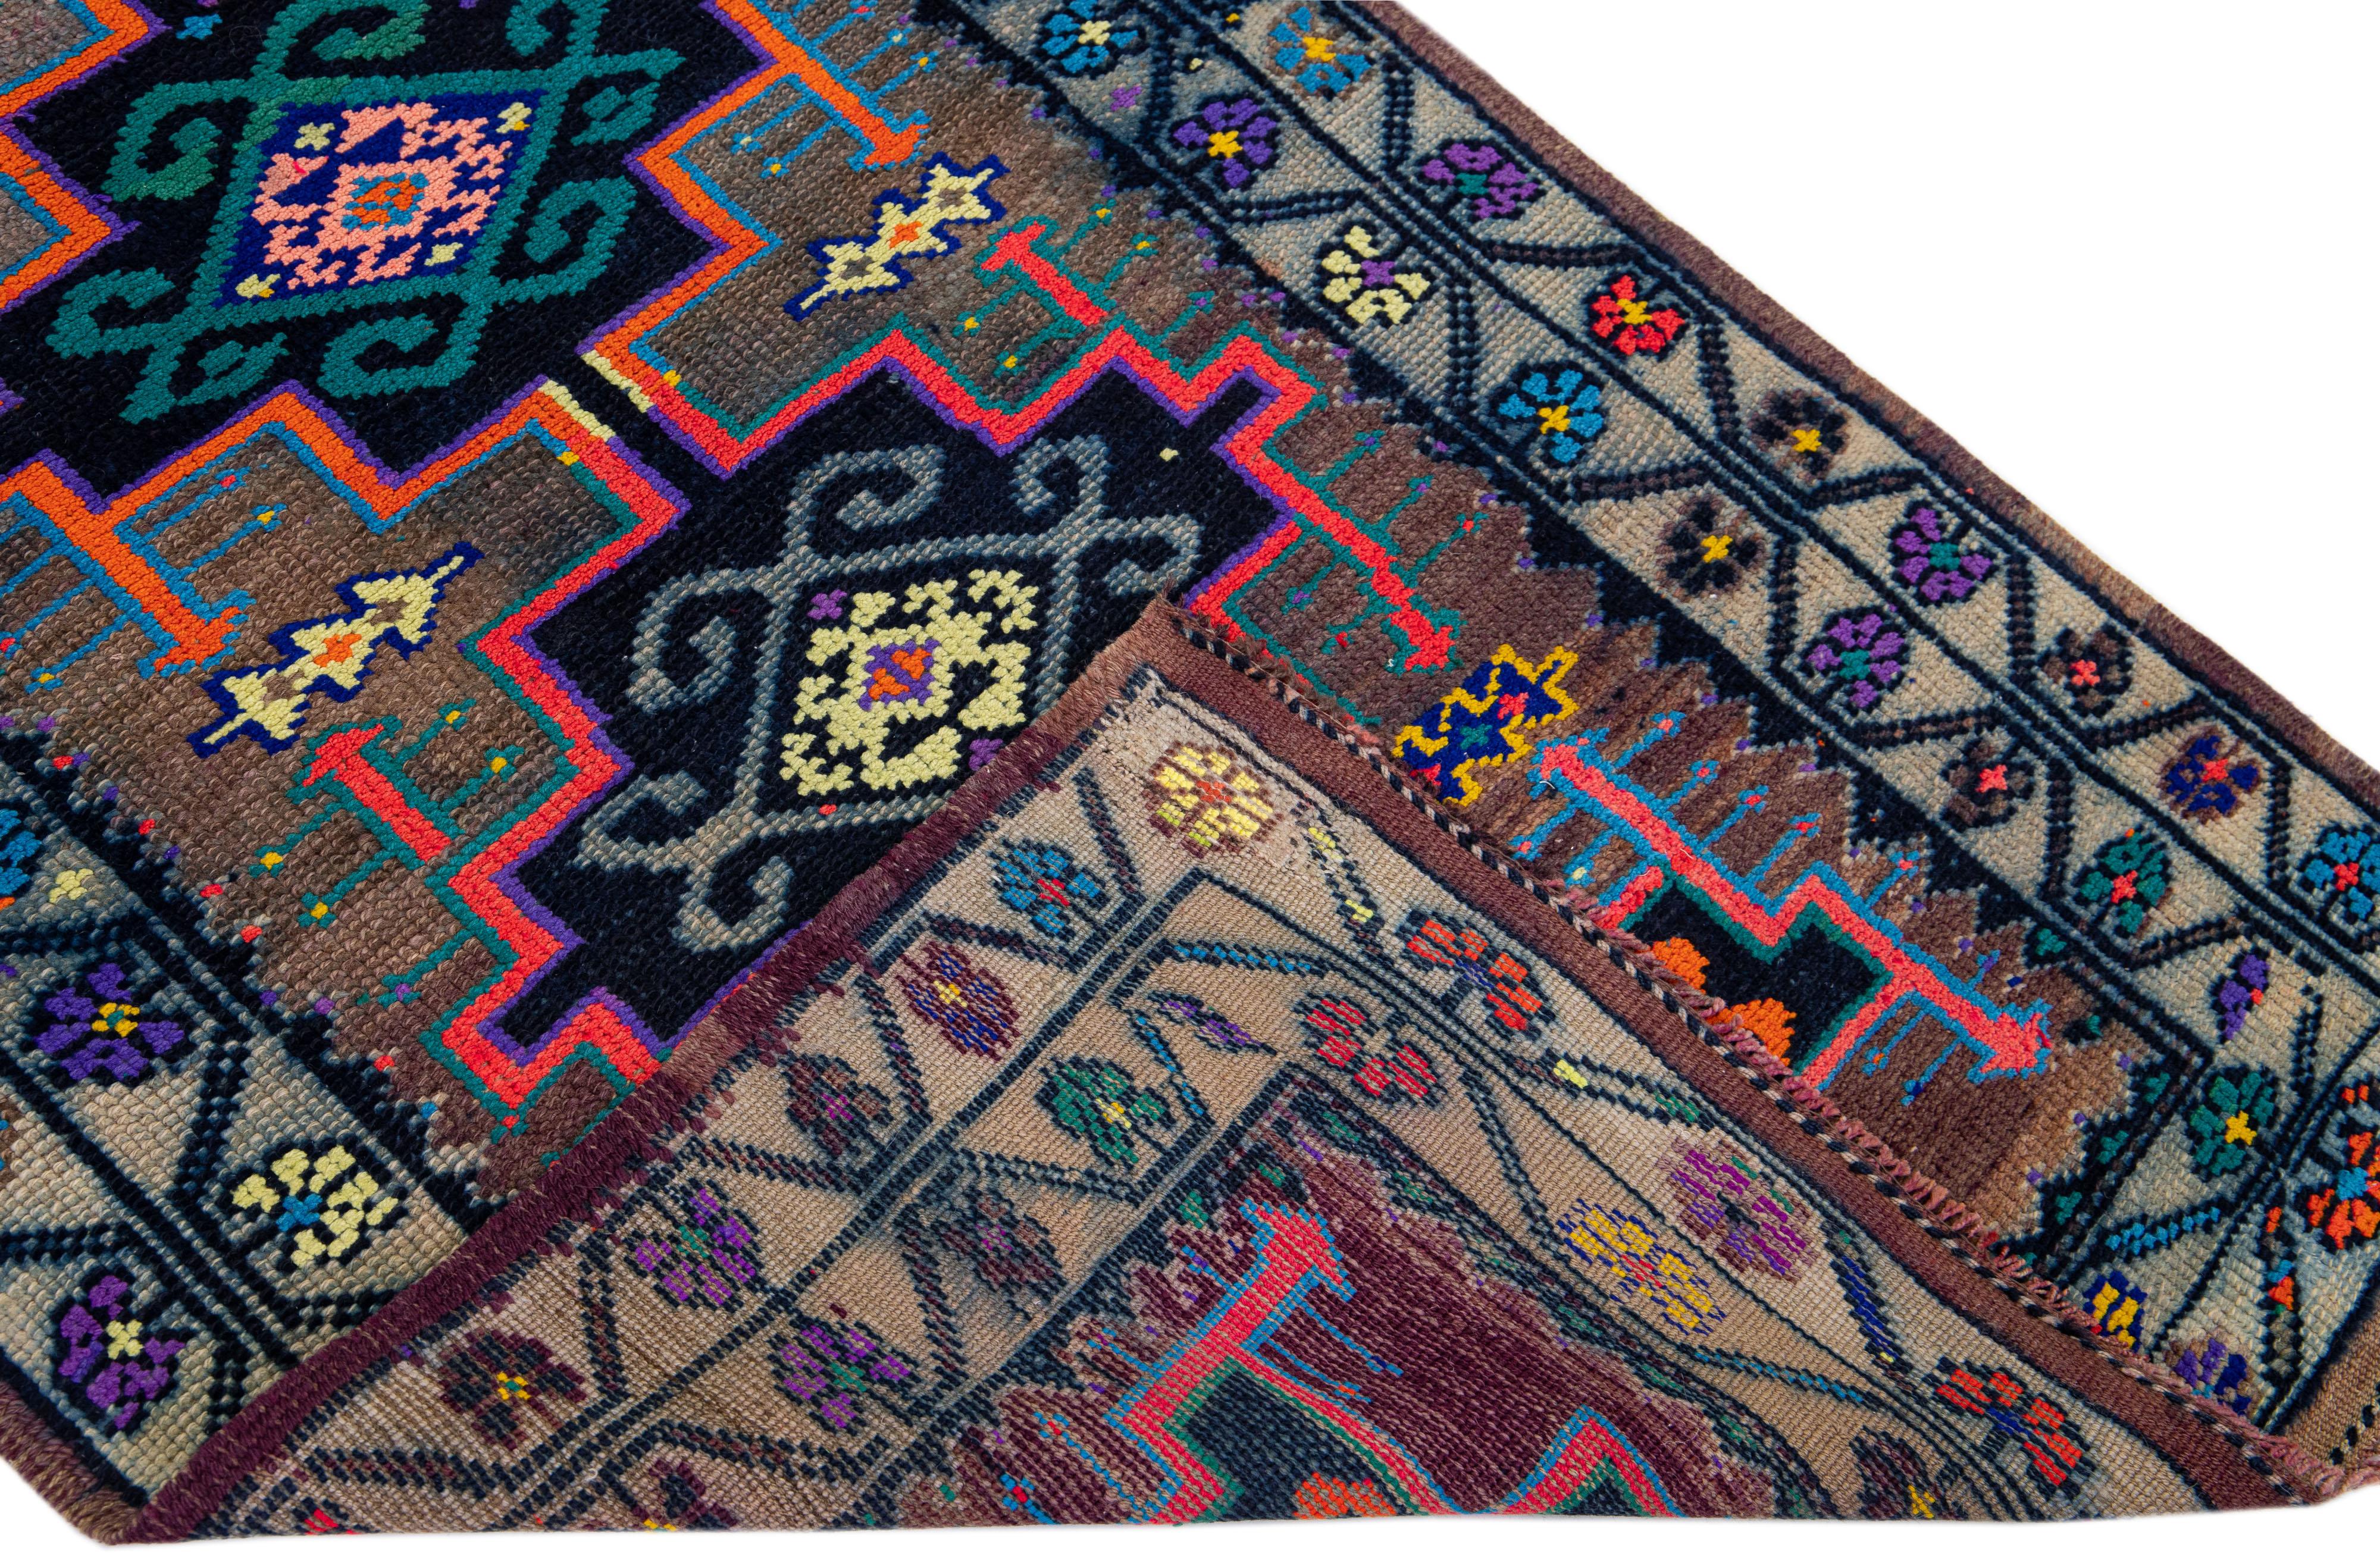 Beautiful vintage hand-knotted Turkish wool rug with a brown color field. This rug has a designed frame with multicolor accents in a gorgeous all-over geometric tribal design.

This rug measures: 3'1